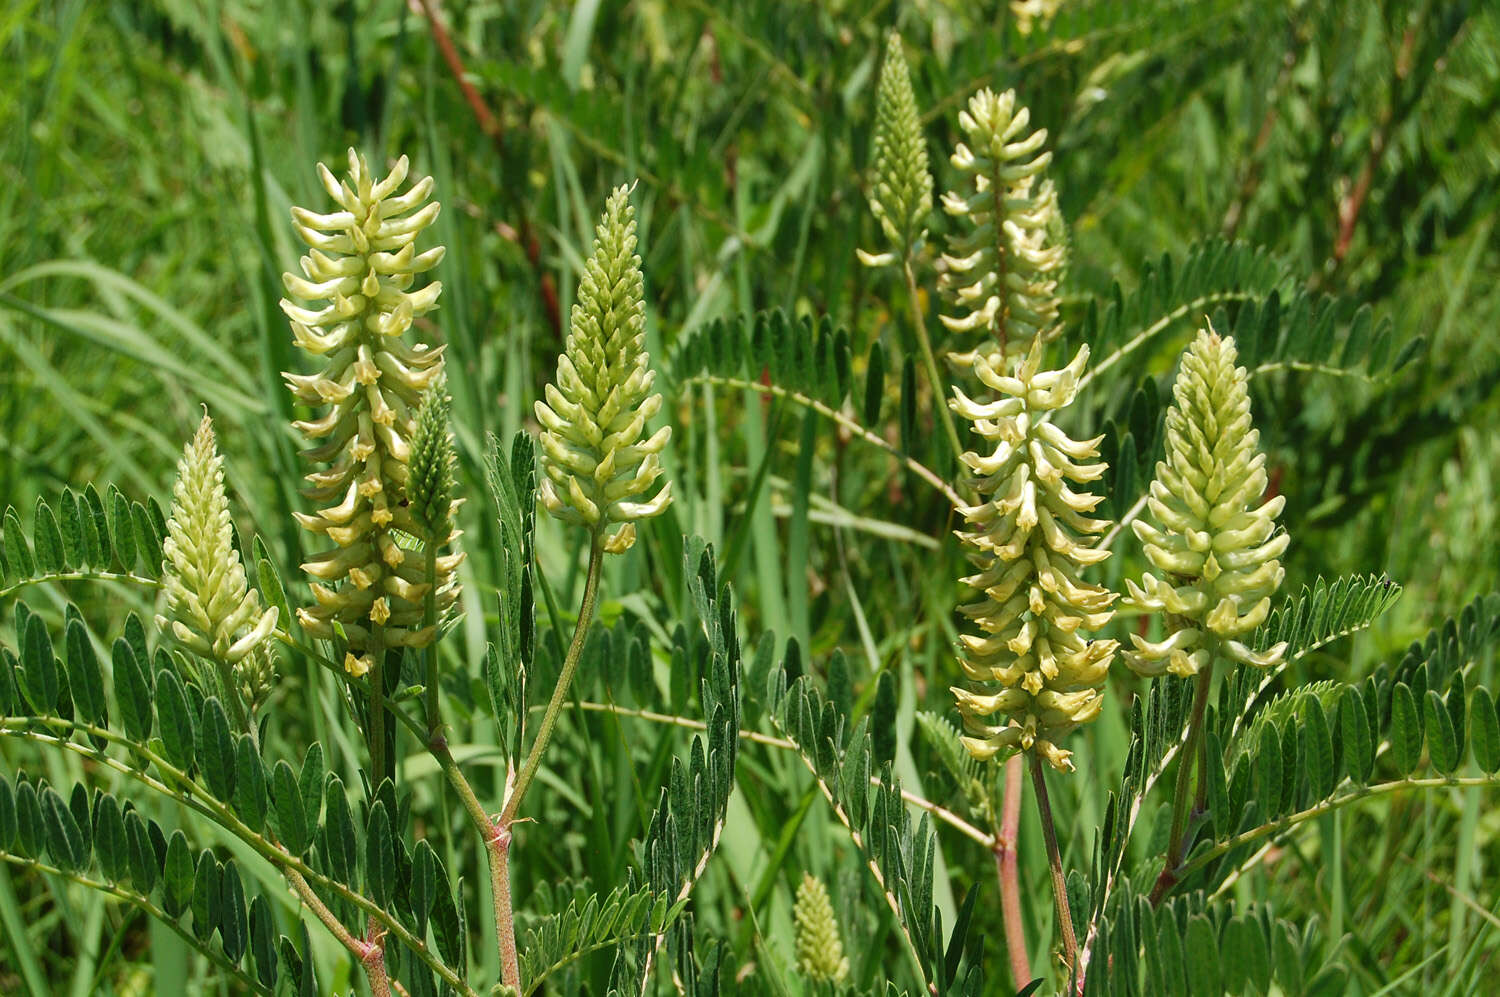 Image of Canadian milkvetch